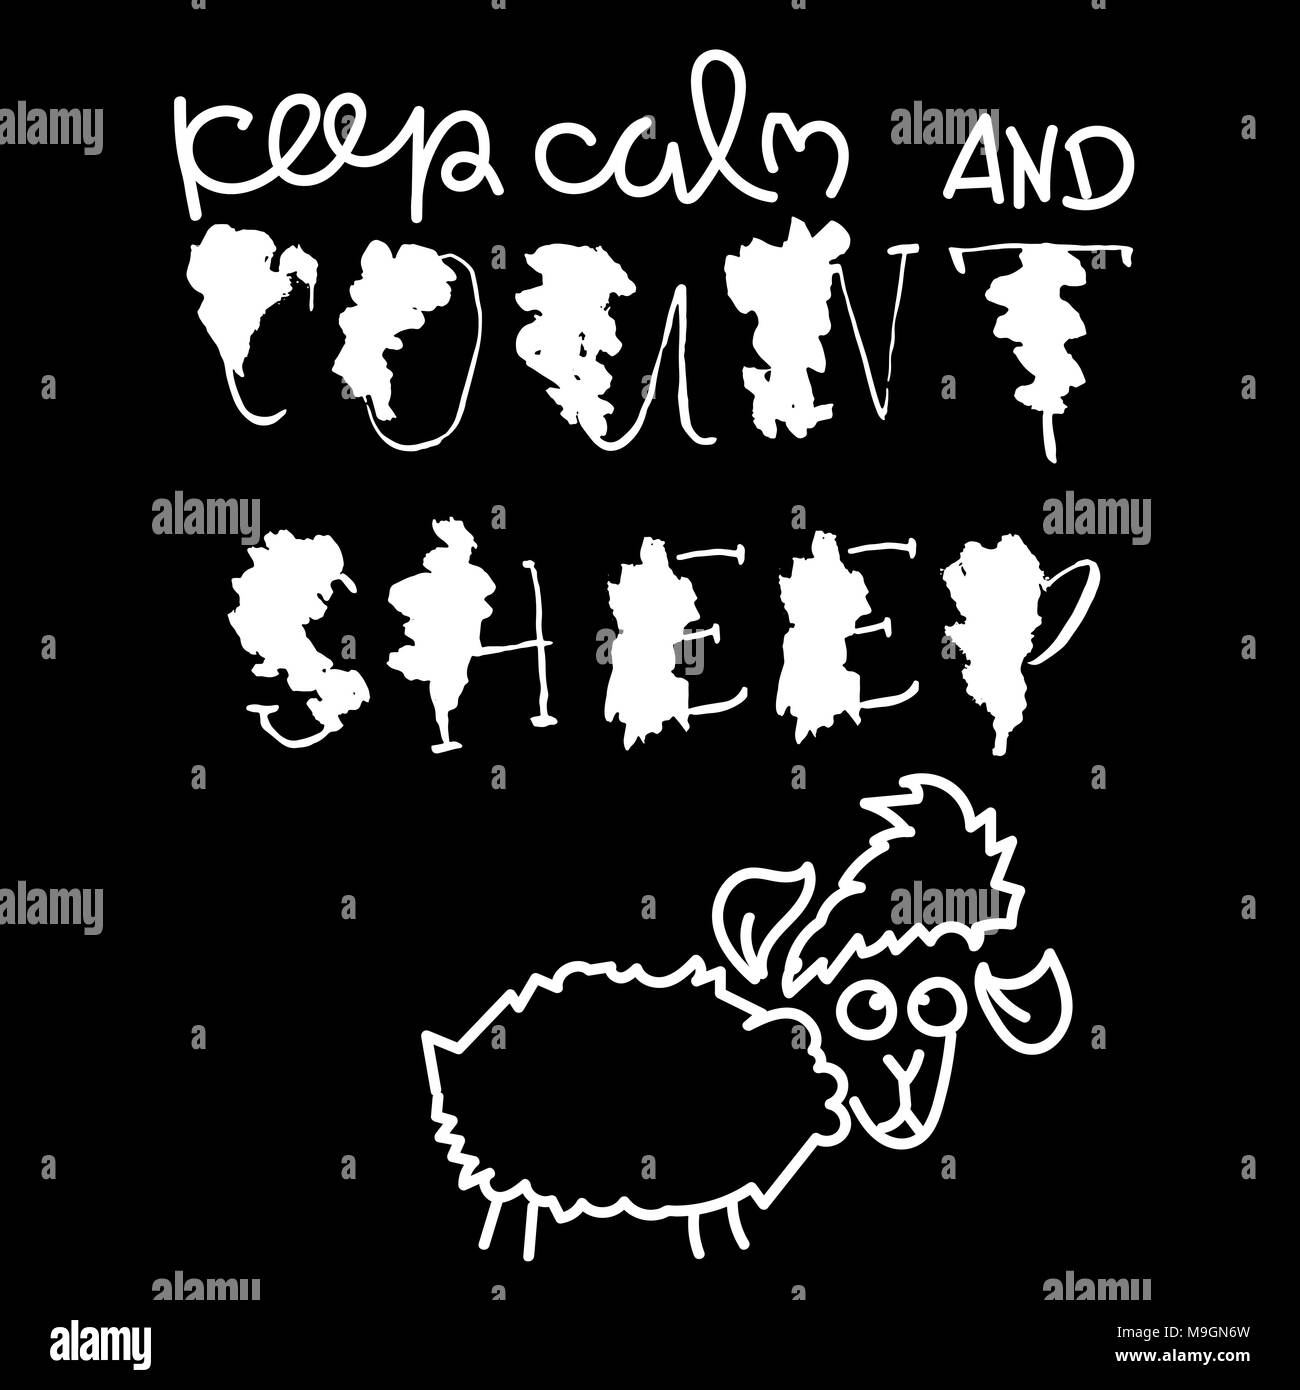 Keep calm and count sheep. Hand drawn dry brush motivational lettering. Ink illustration. Modern calligraphy phrase. Vector illustration. Stock Vector